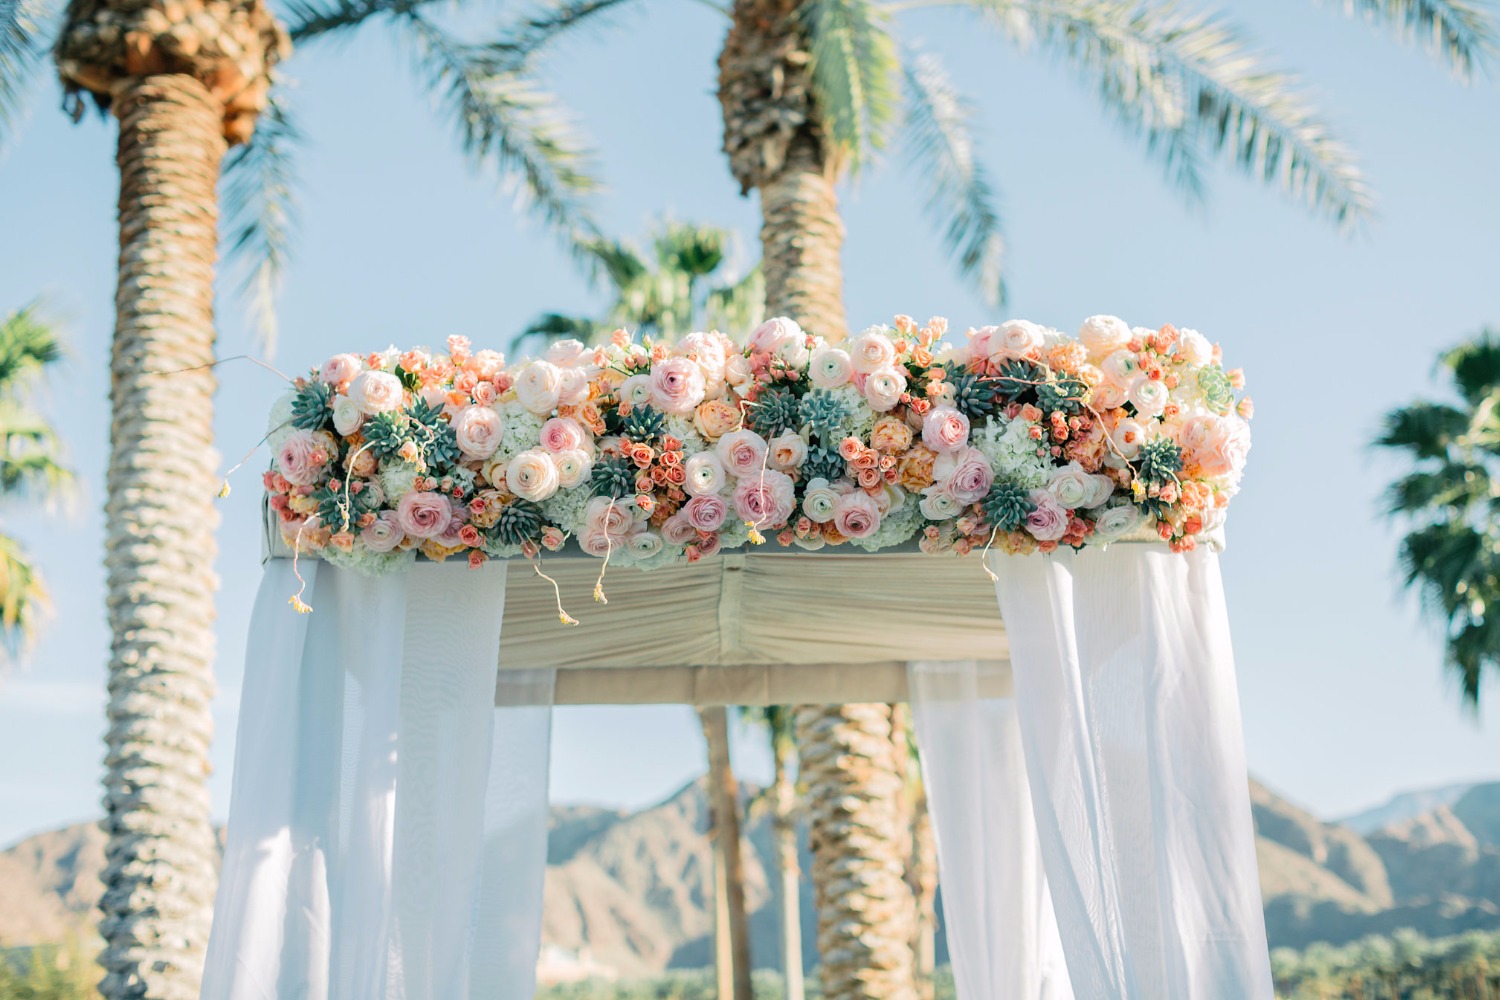 indian-wells-resort-weddings-with-a-view